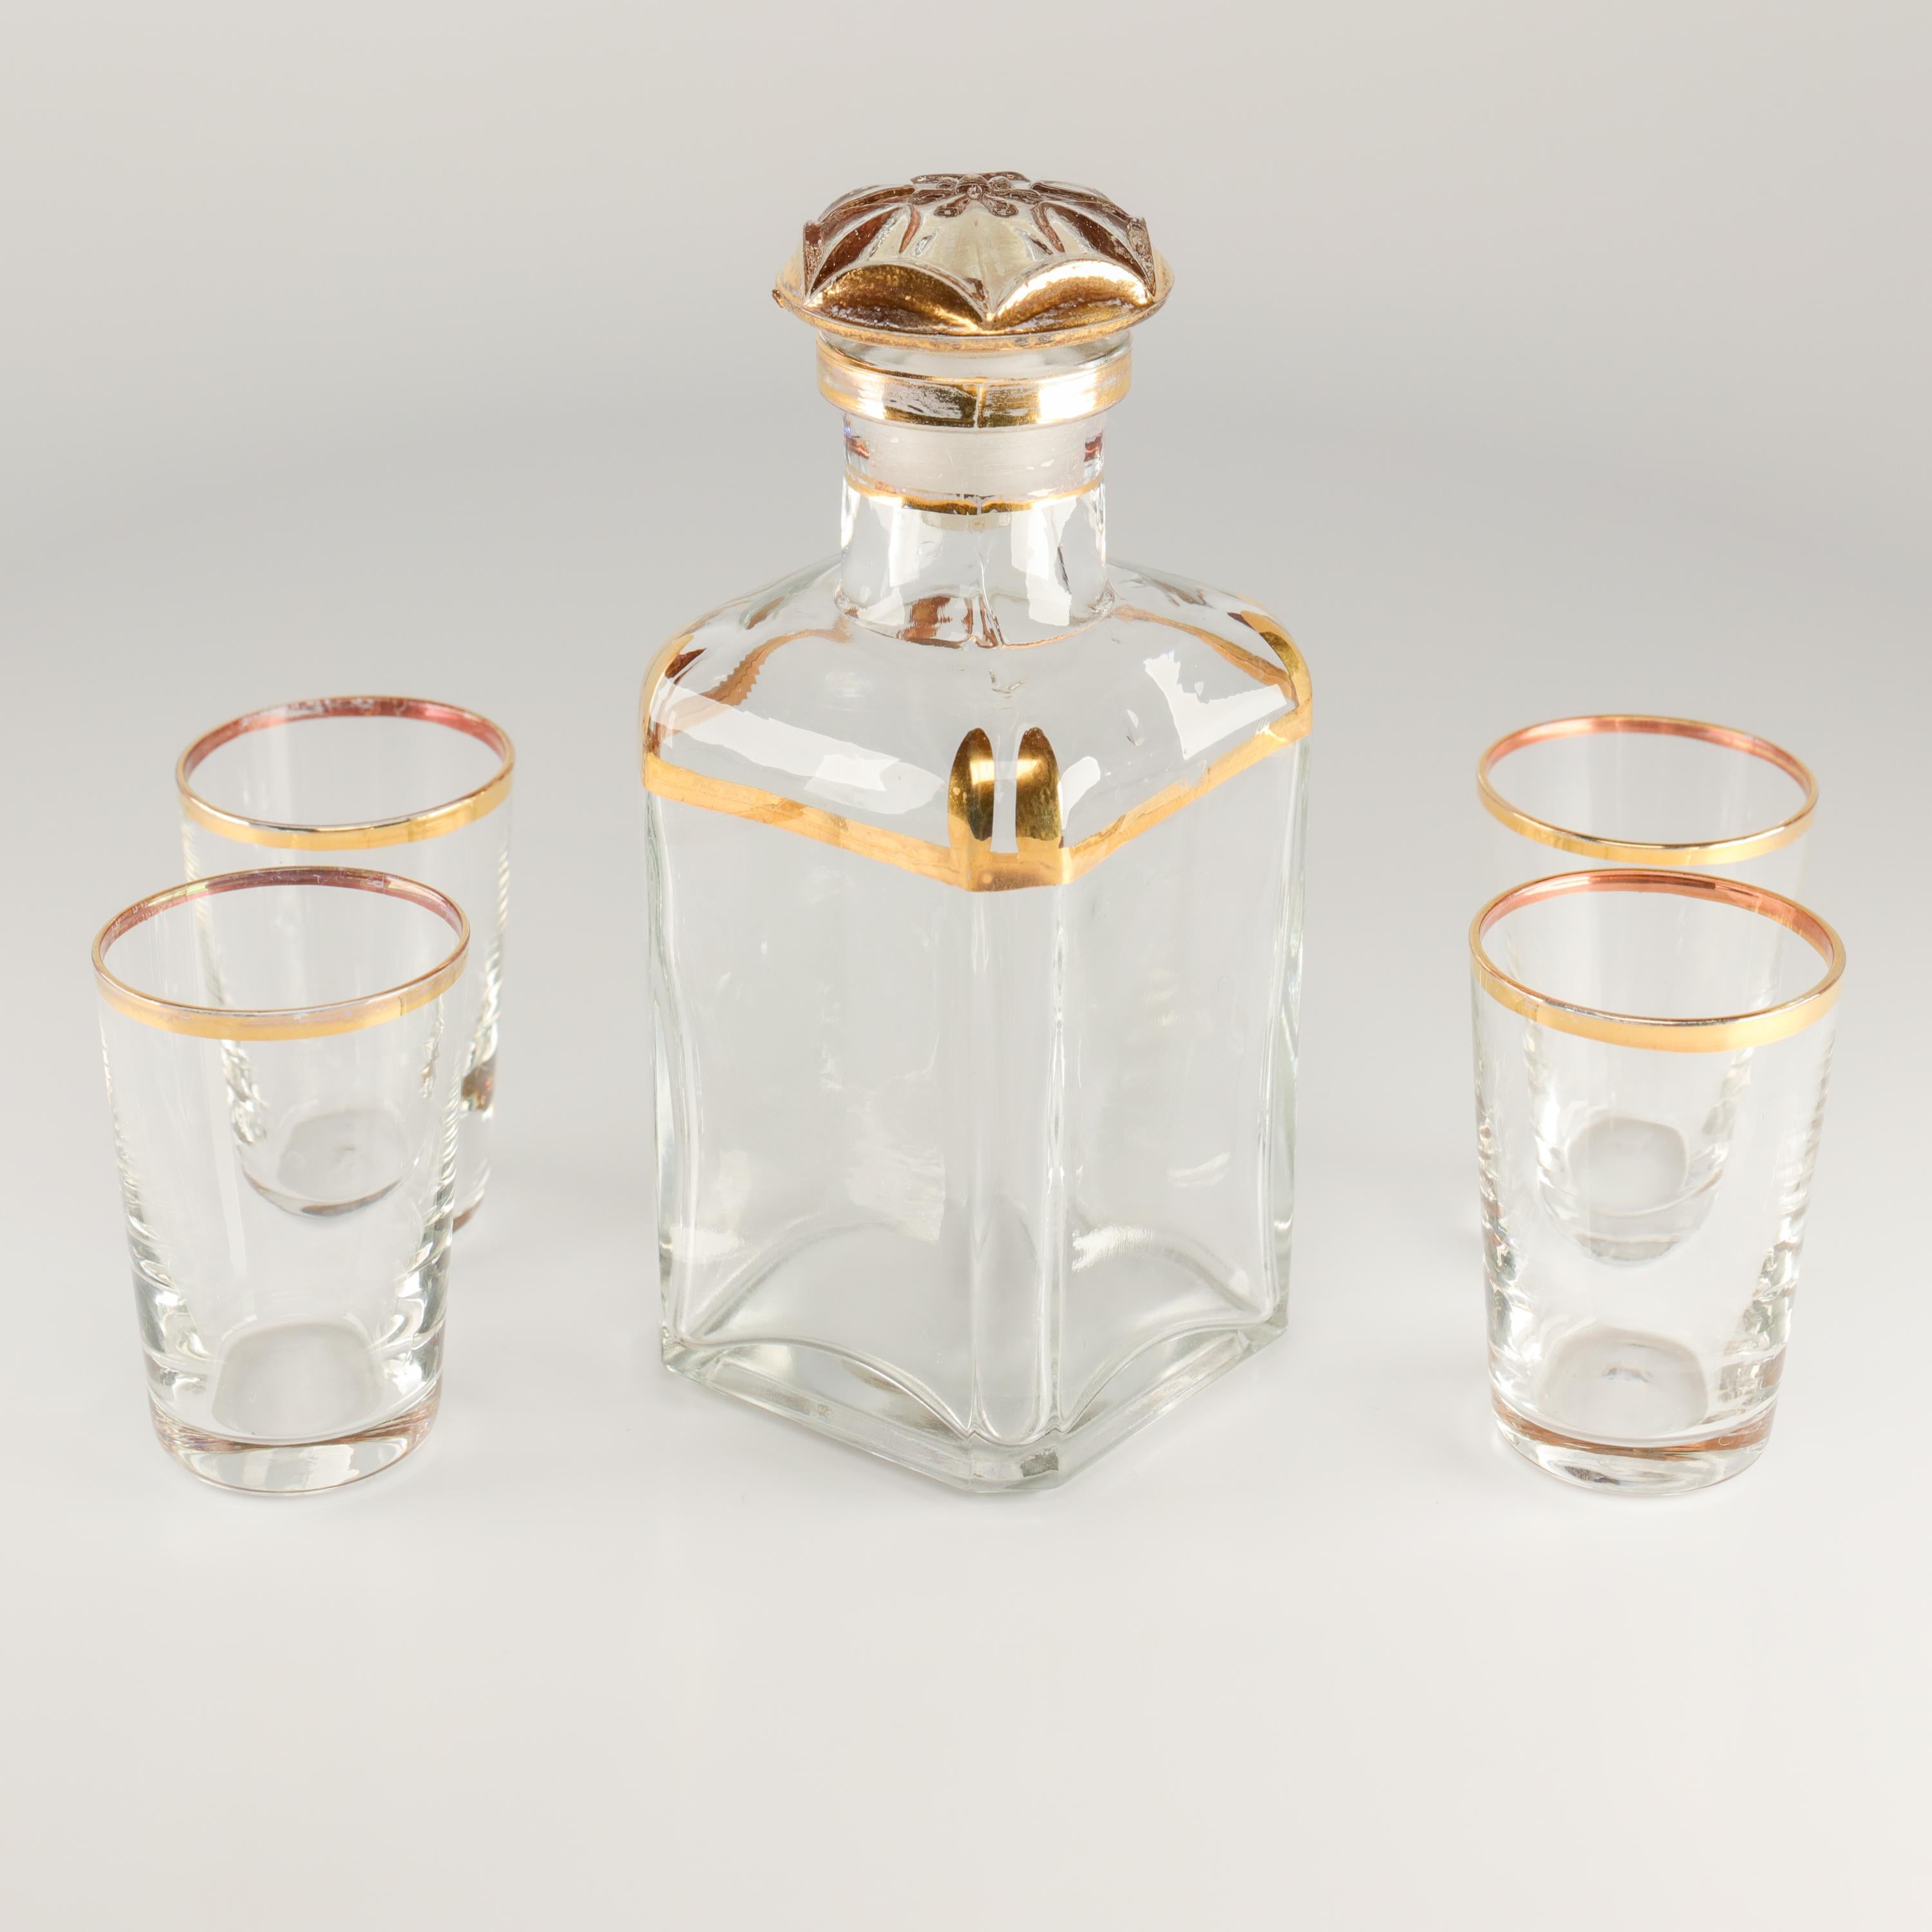 Neoclassical Decanter and Glasses Vintage French Tantalus Book Bar Set